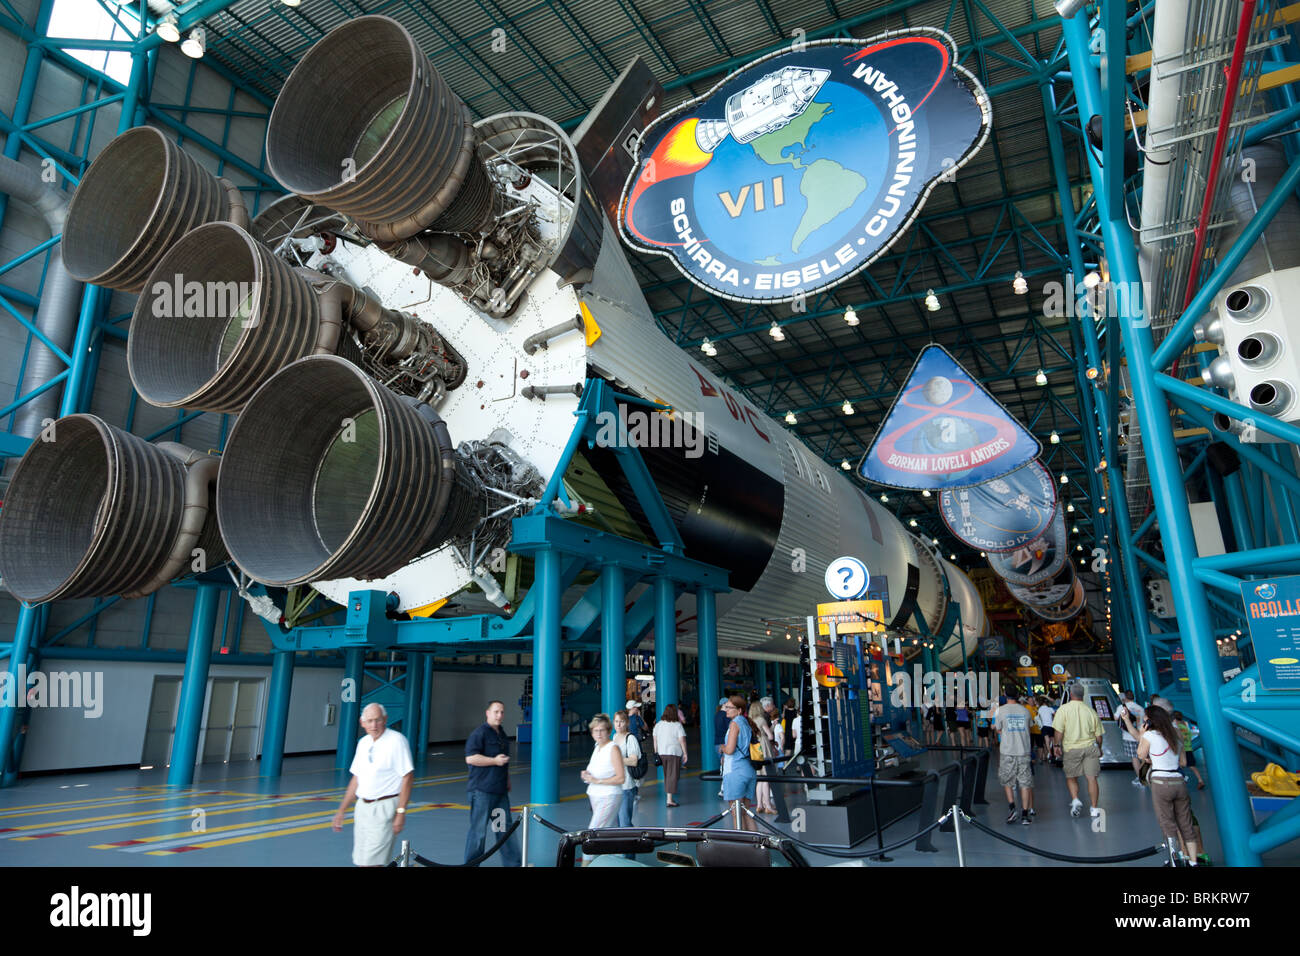 The Saturn V moon rocket in the Kennedy Space Centre,Orlando, Florida. Stock Photo